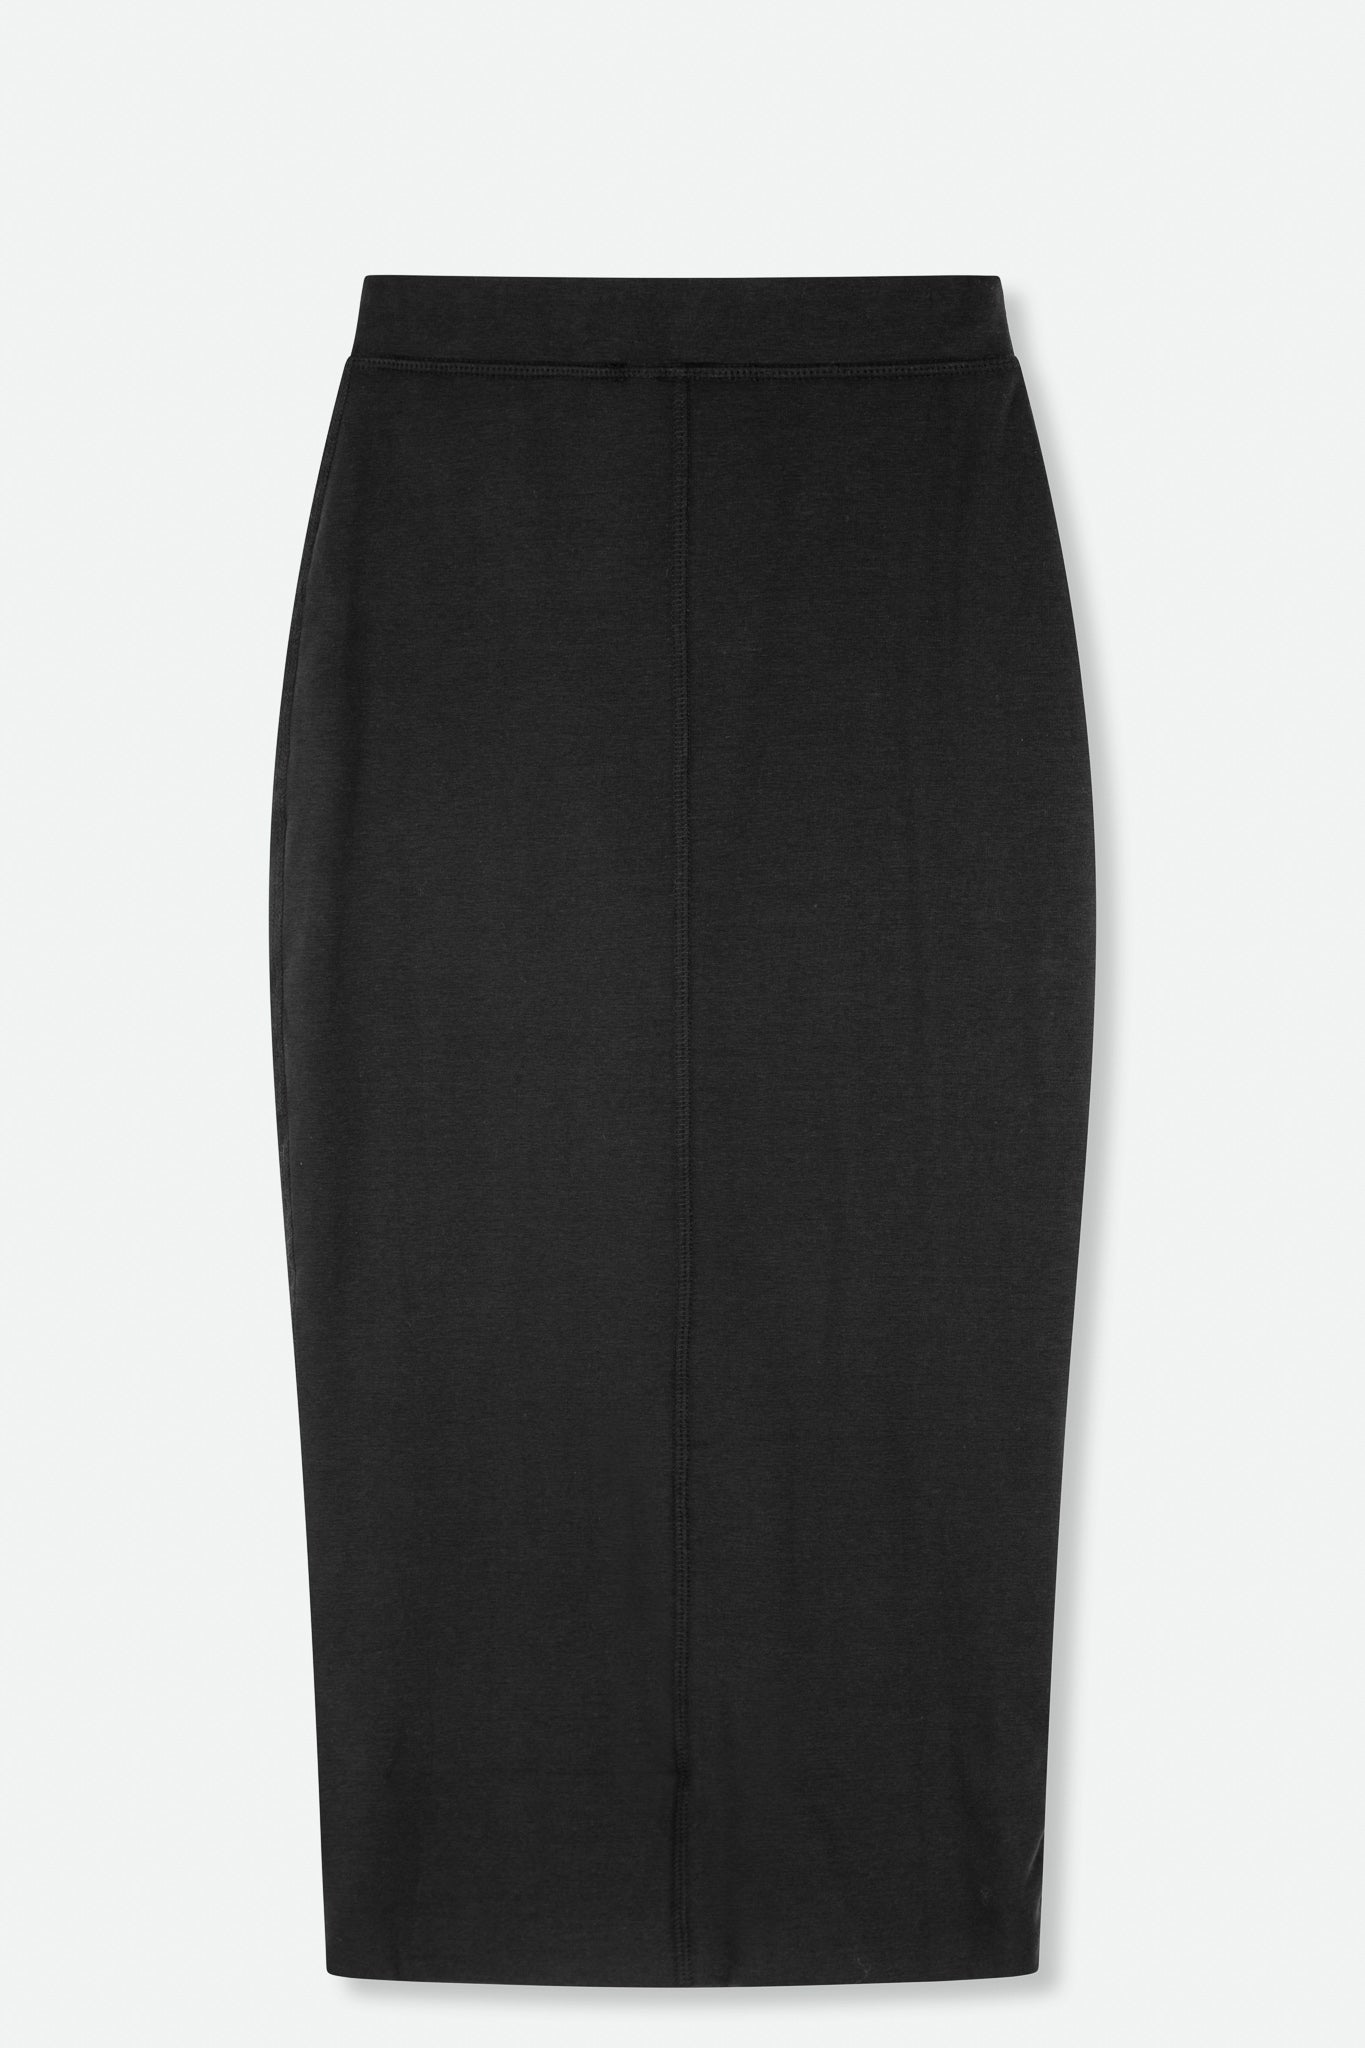 LONG PULL ON SKIRT IN PIMA COTTON STRETCH BLACK - Jarbo